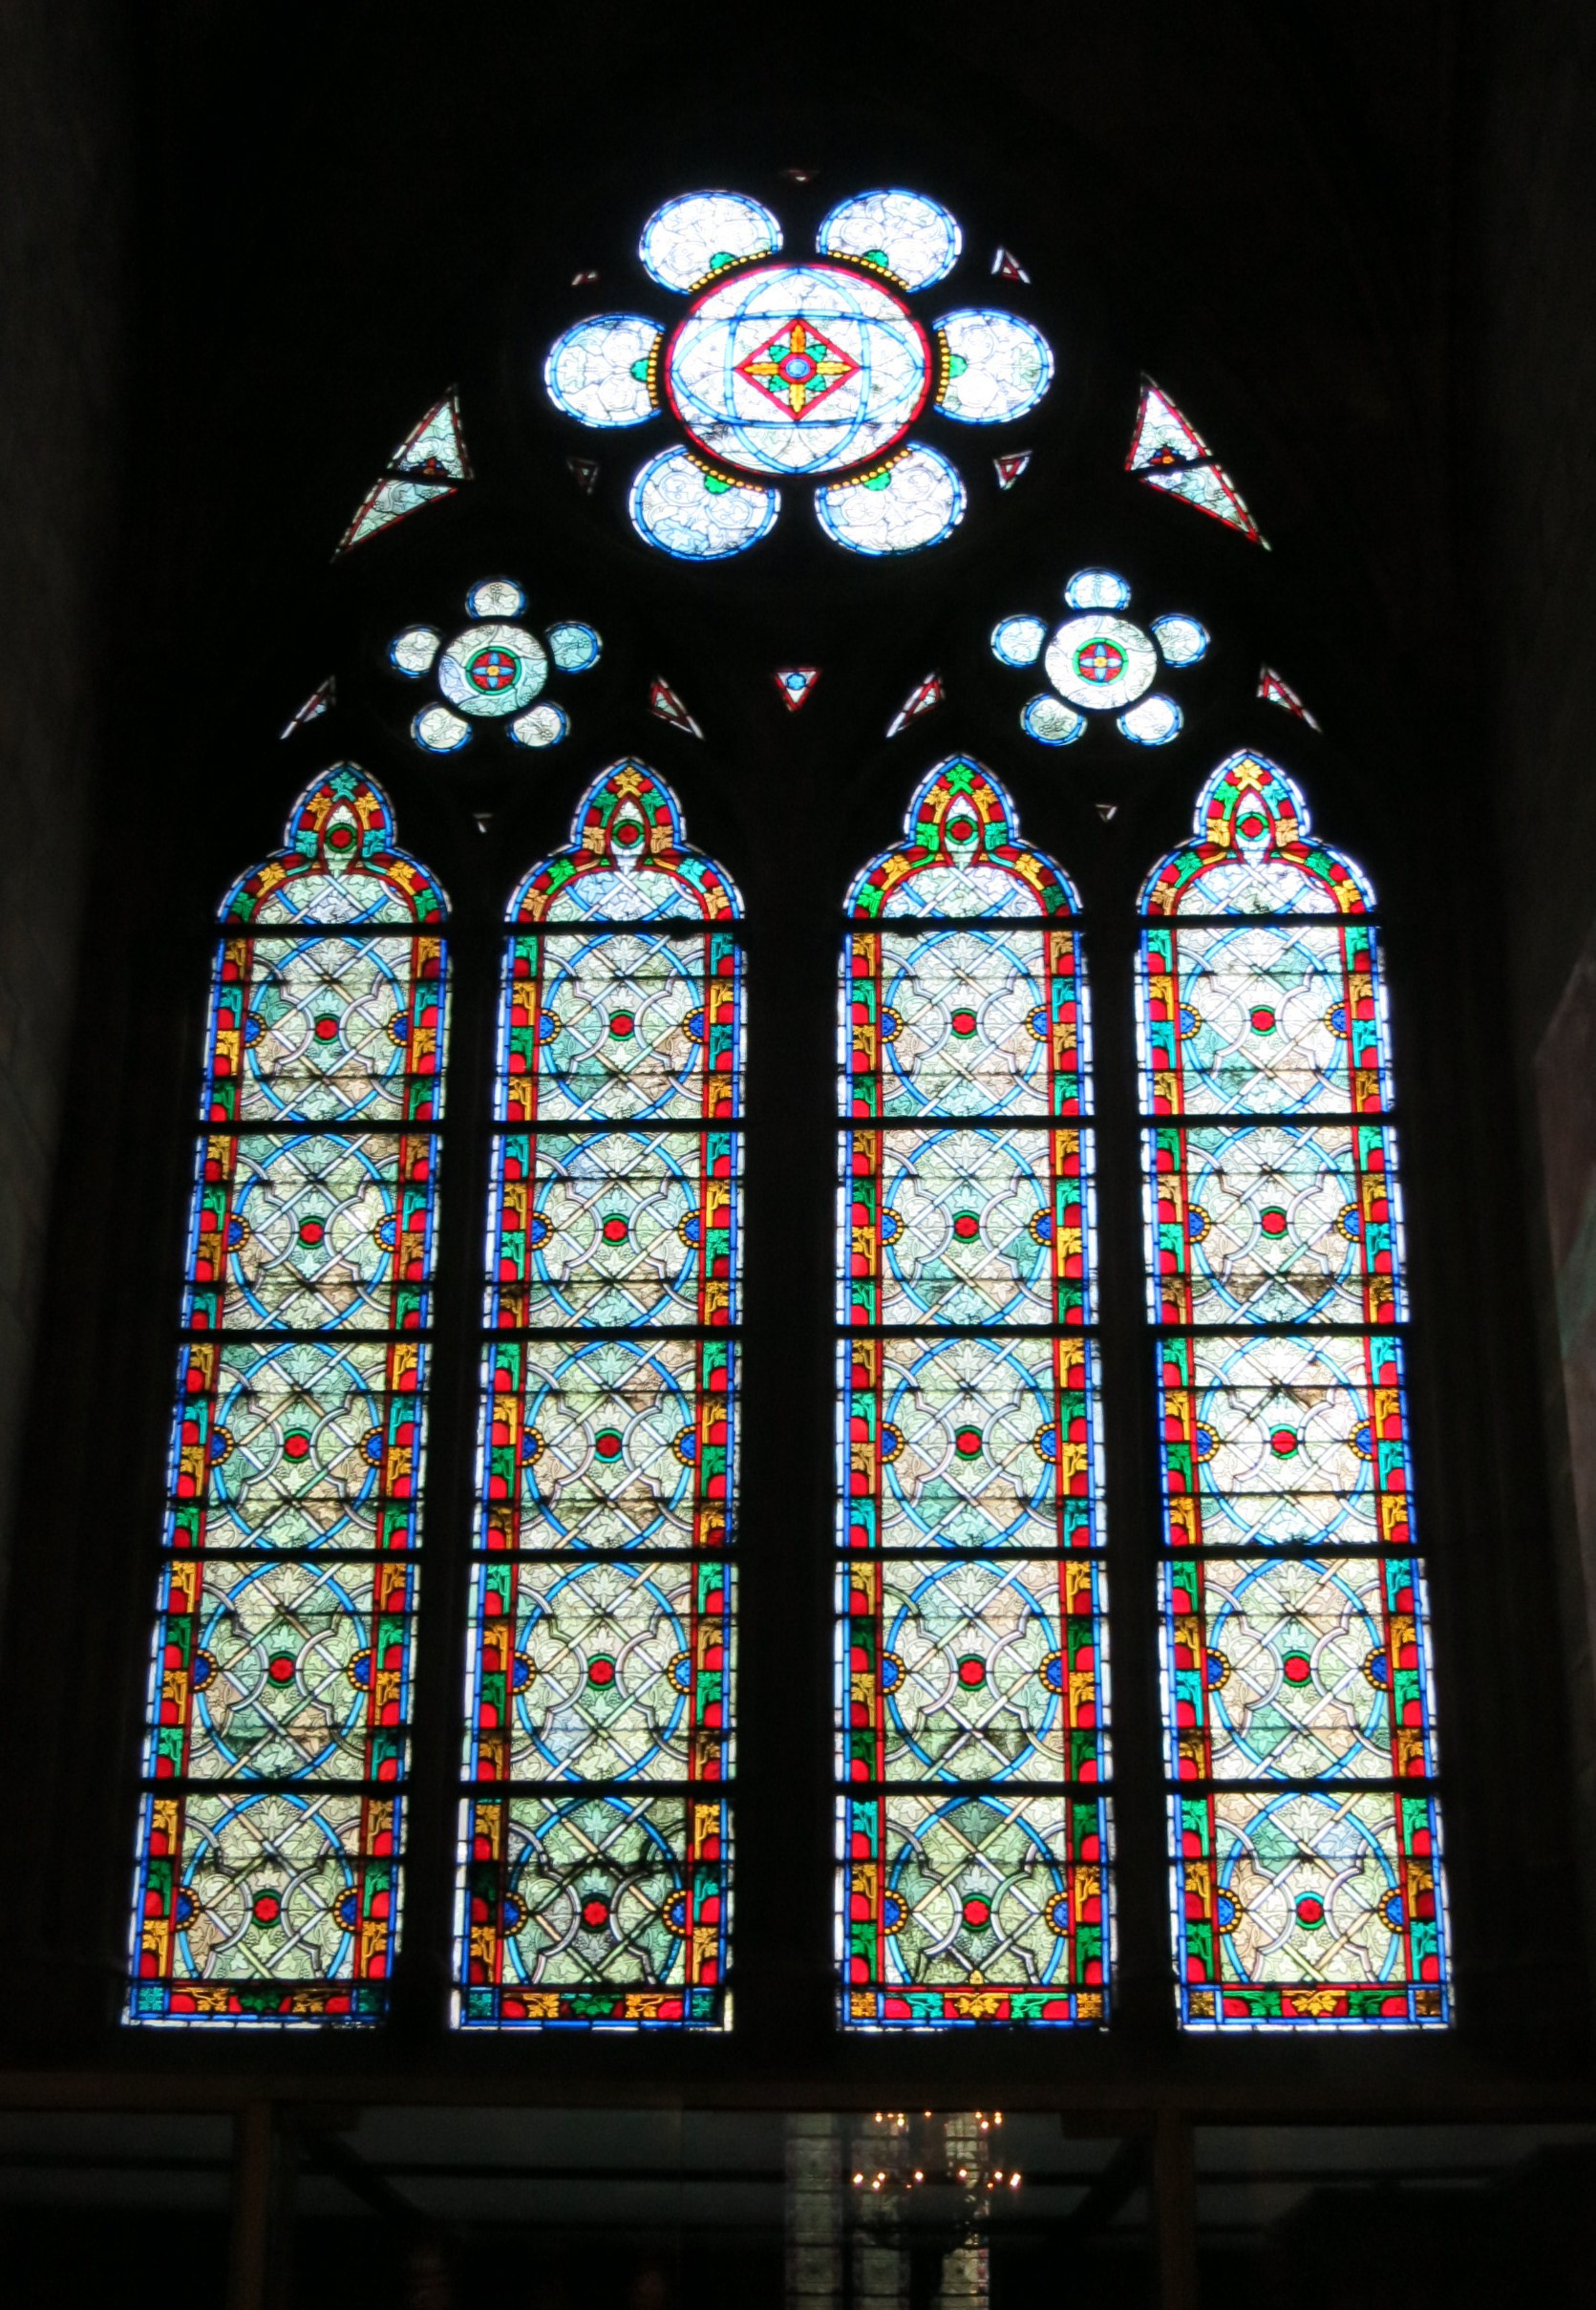 Stained glass window of Notre-Dame Cathedral in Paris